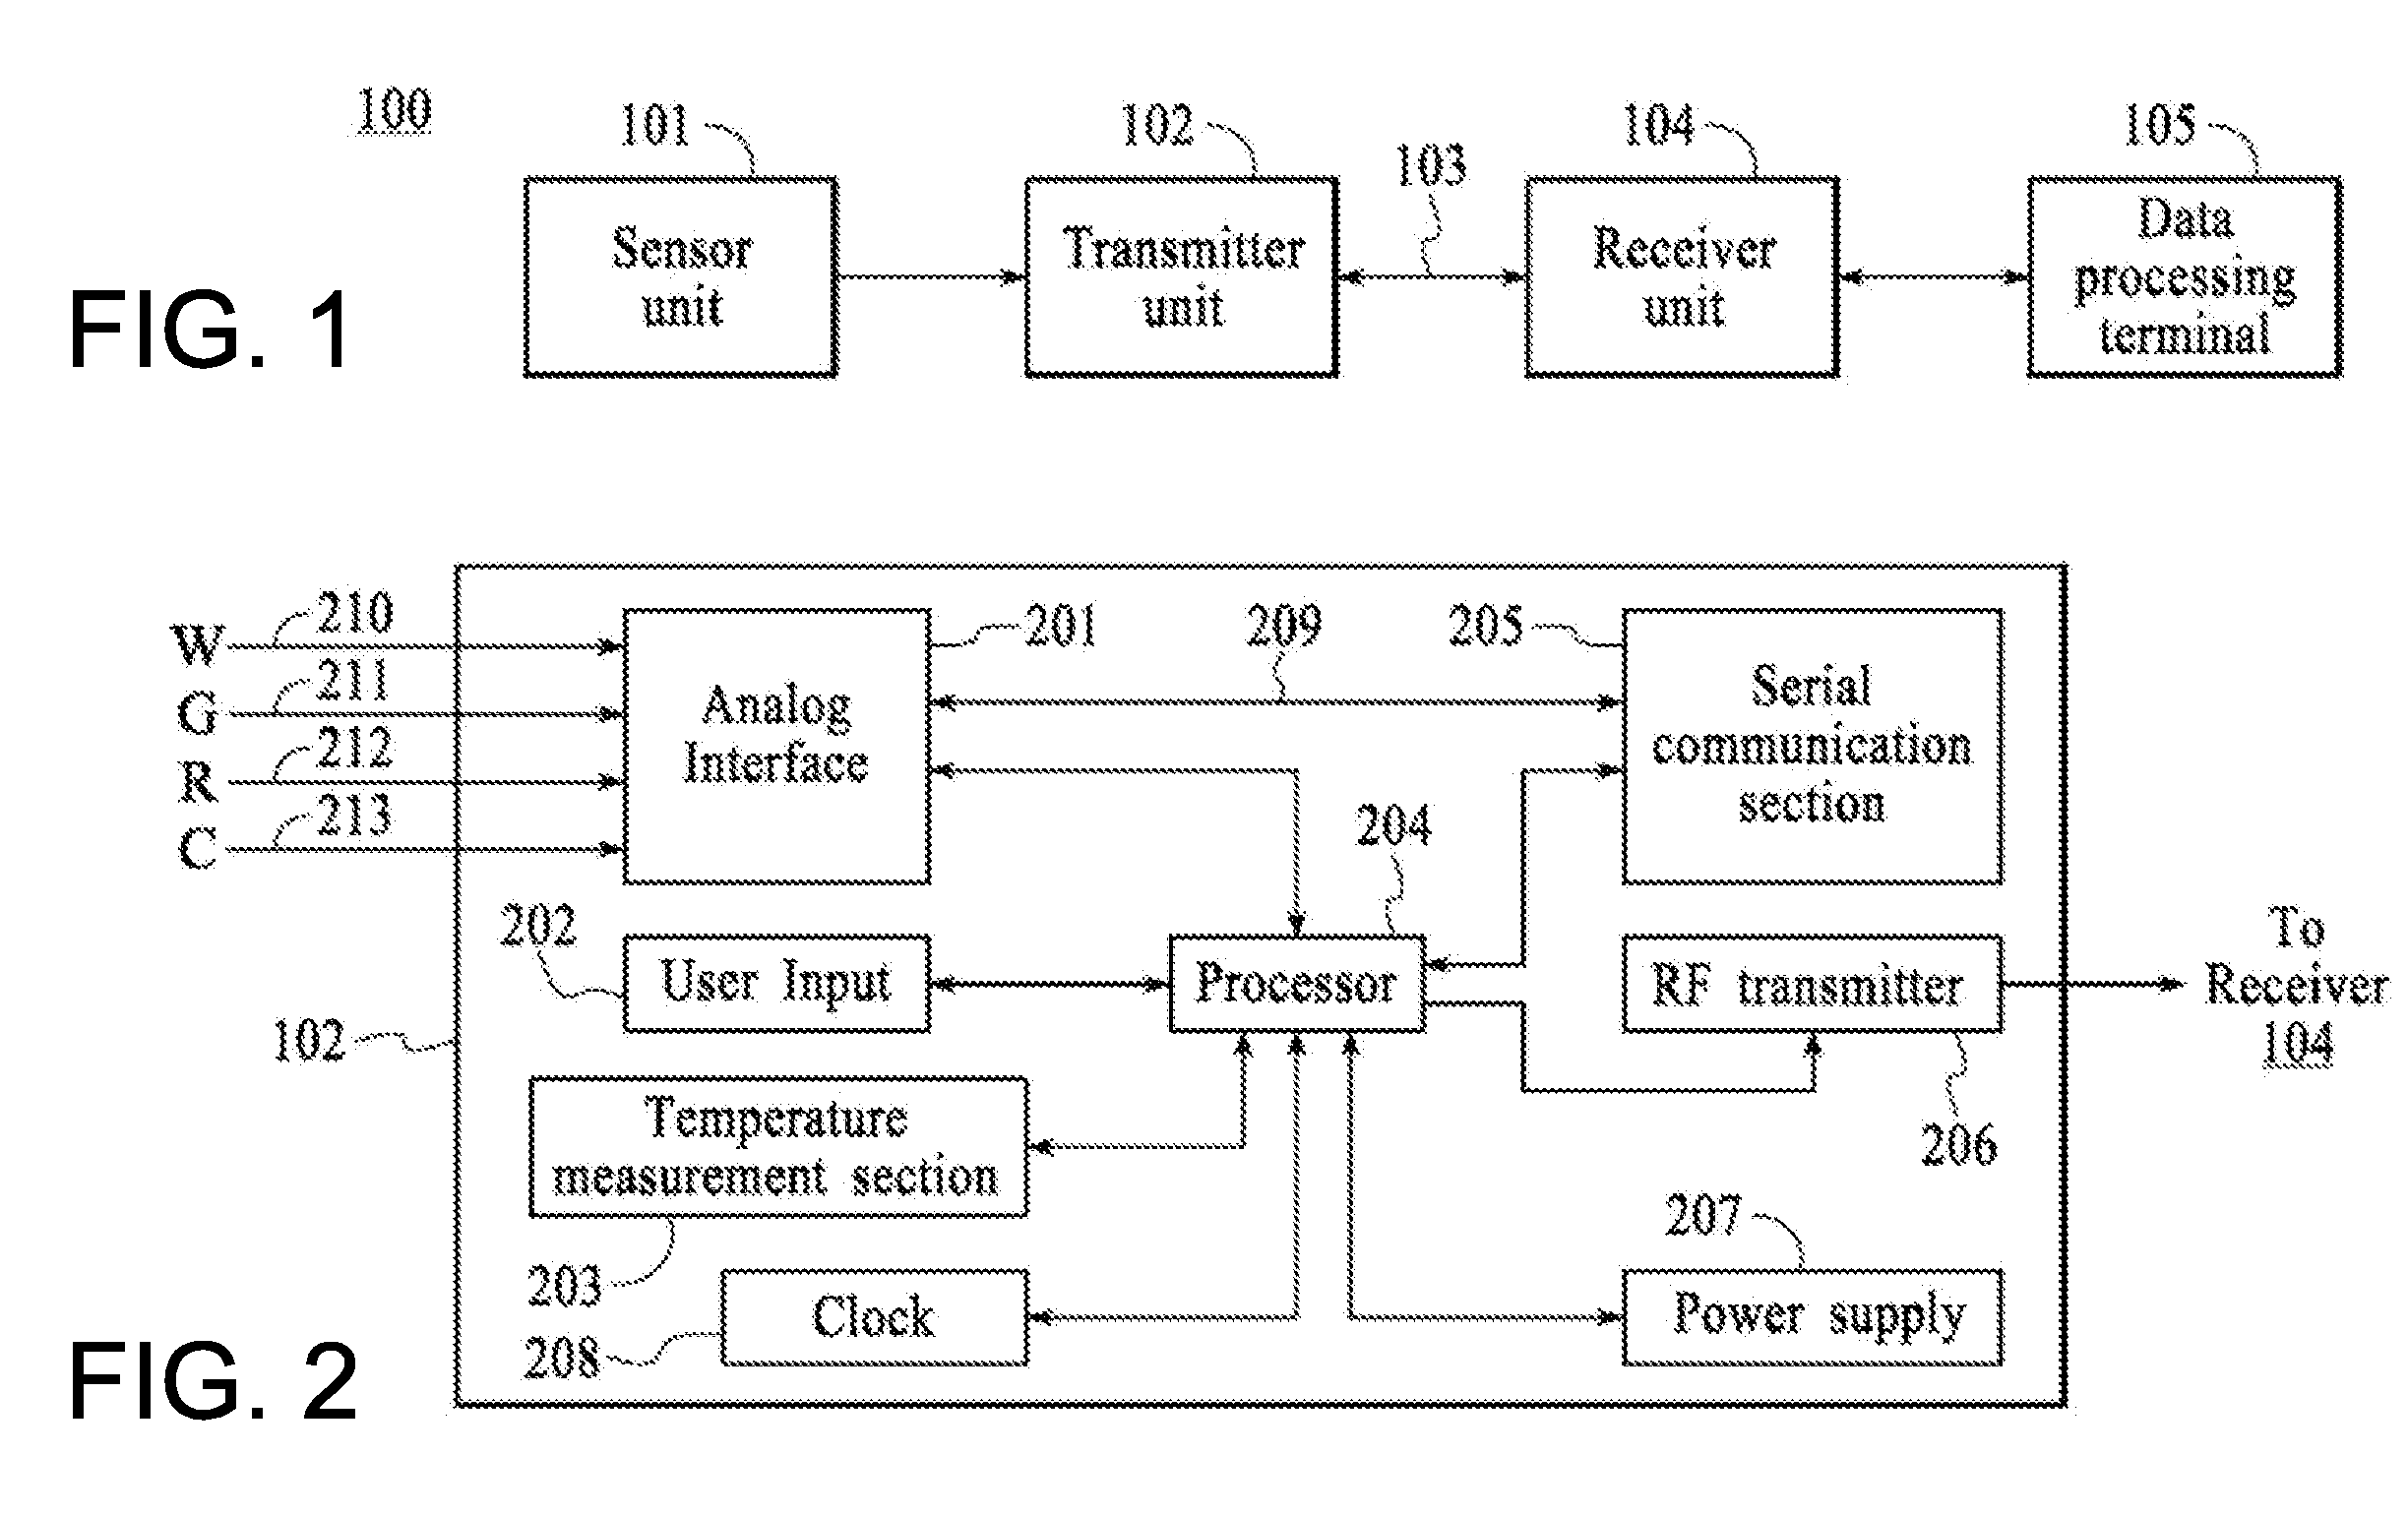 Method and System for Providing Data Management in Data Monitoring System